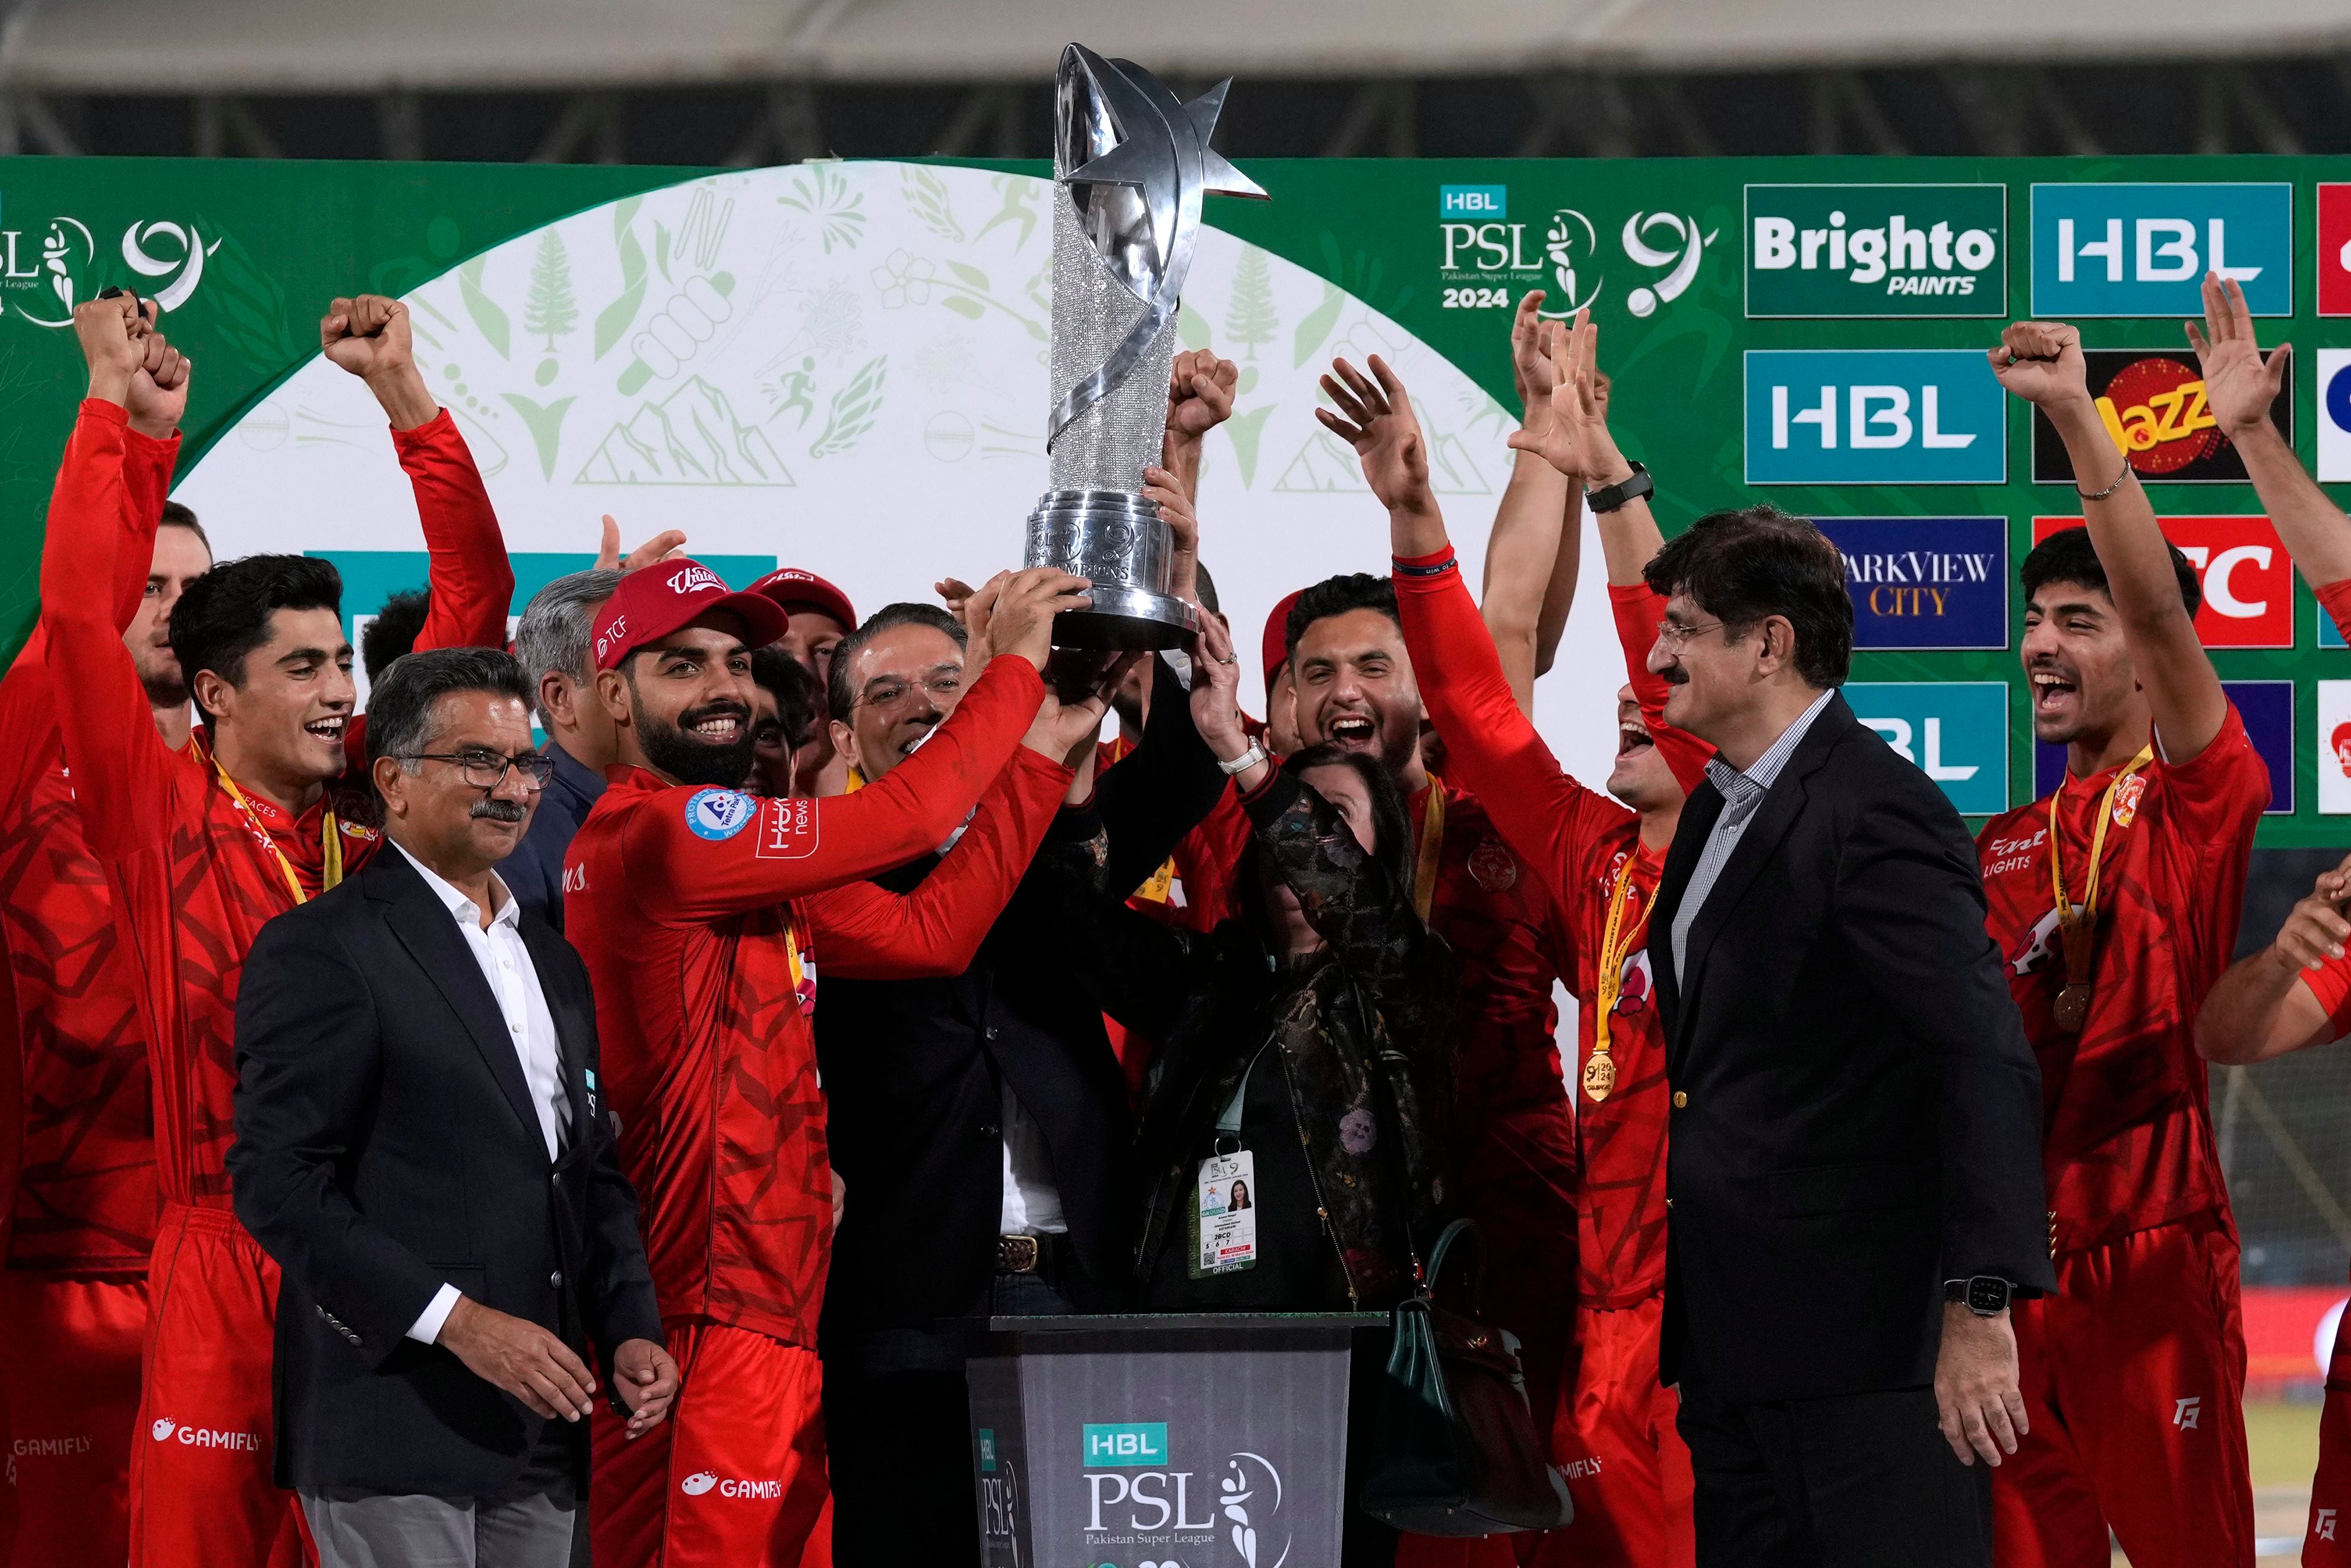 usman khan and muhammad waseem miss out on winners’ medals after epic psl final